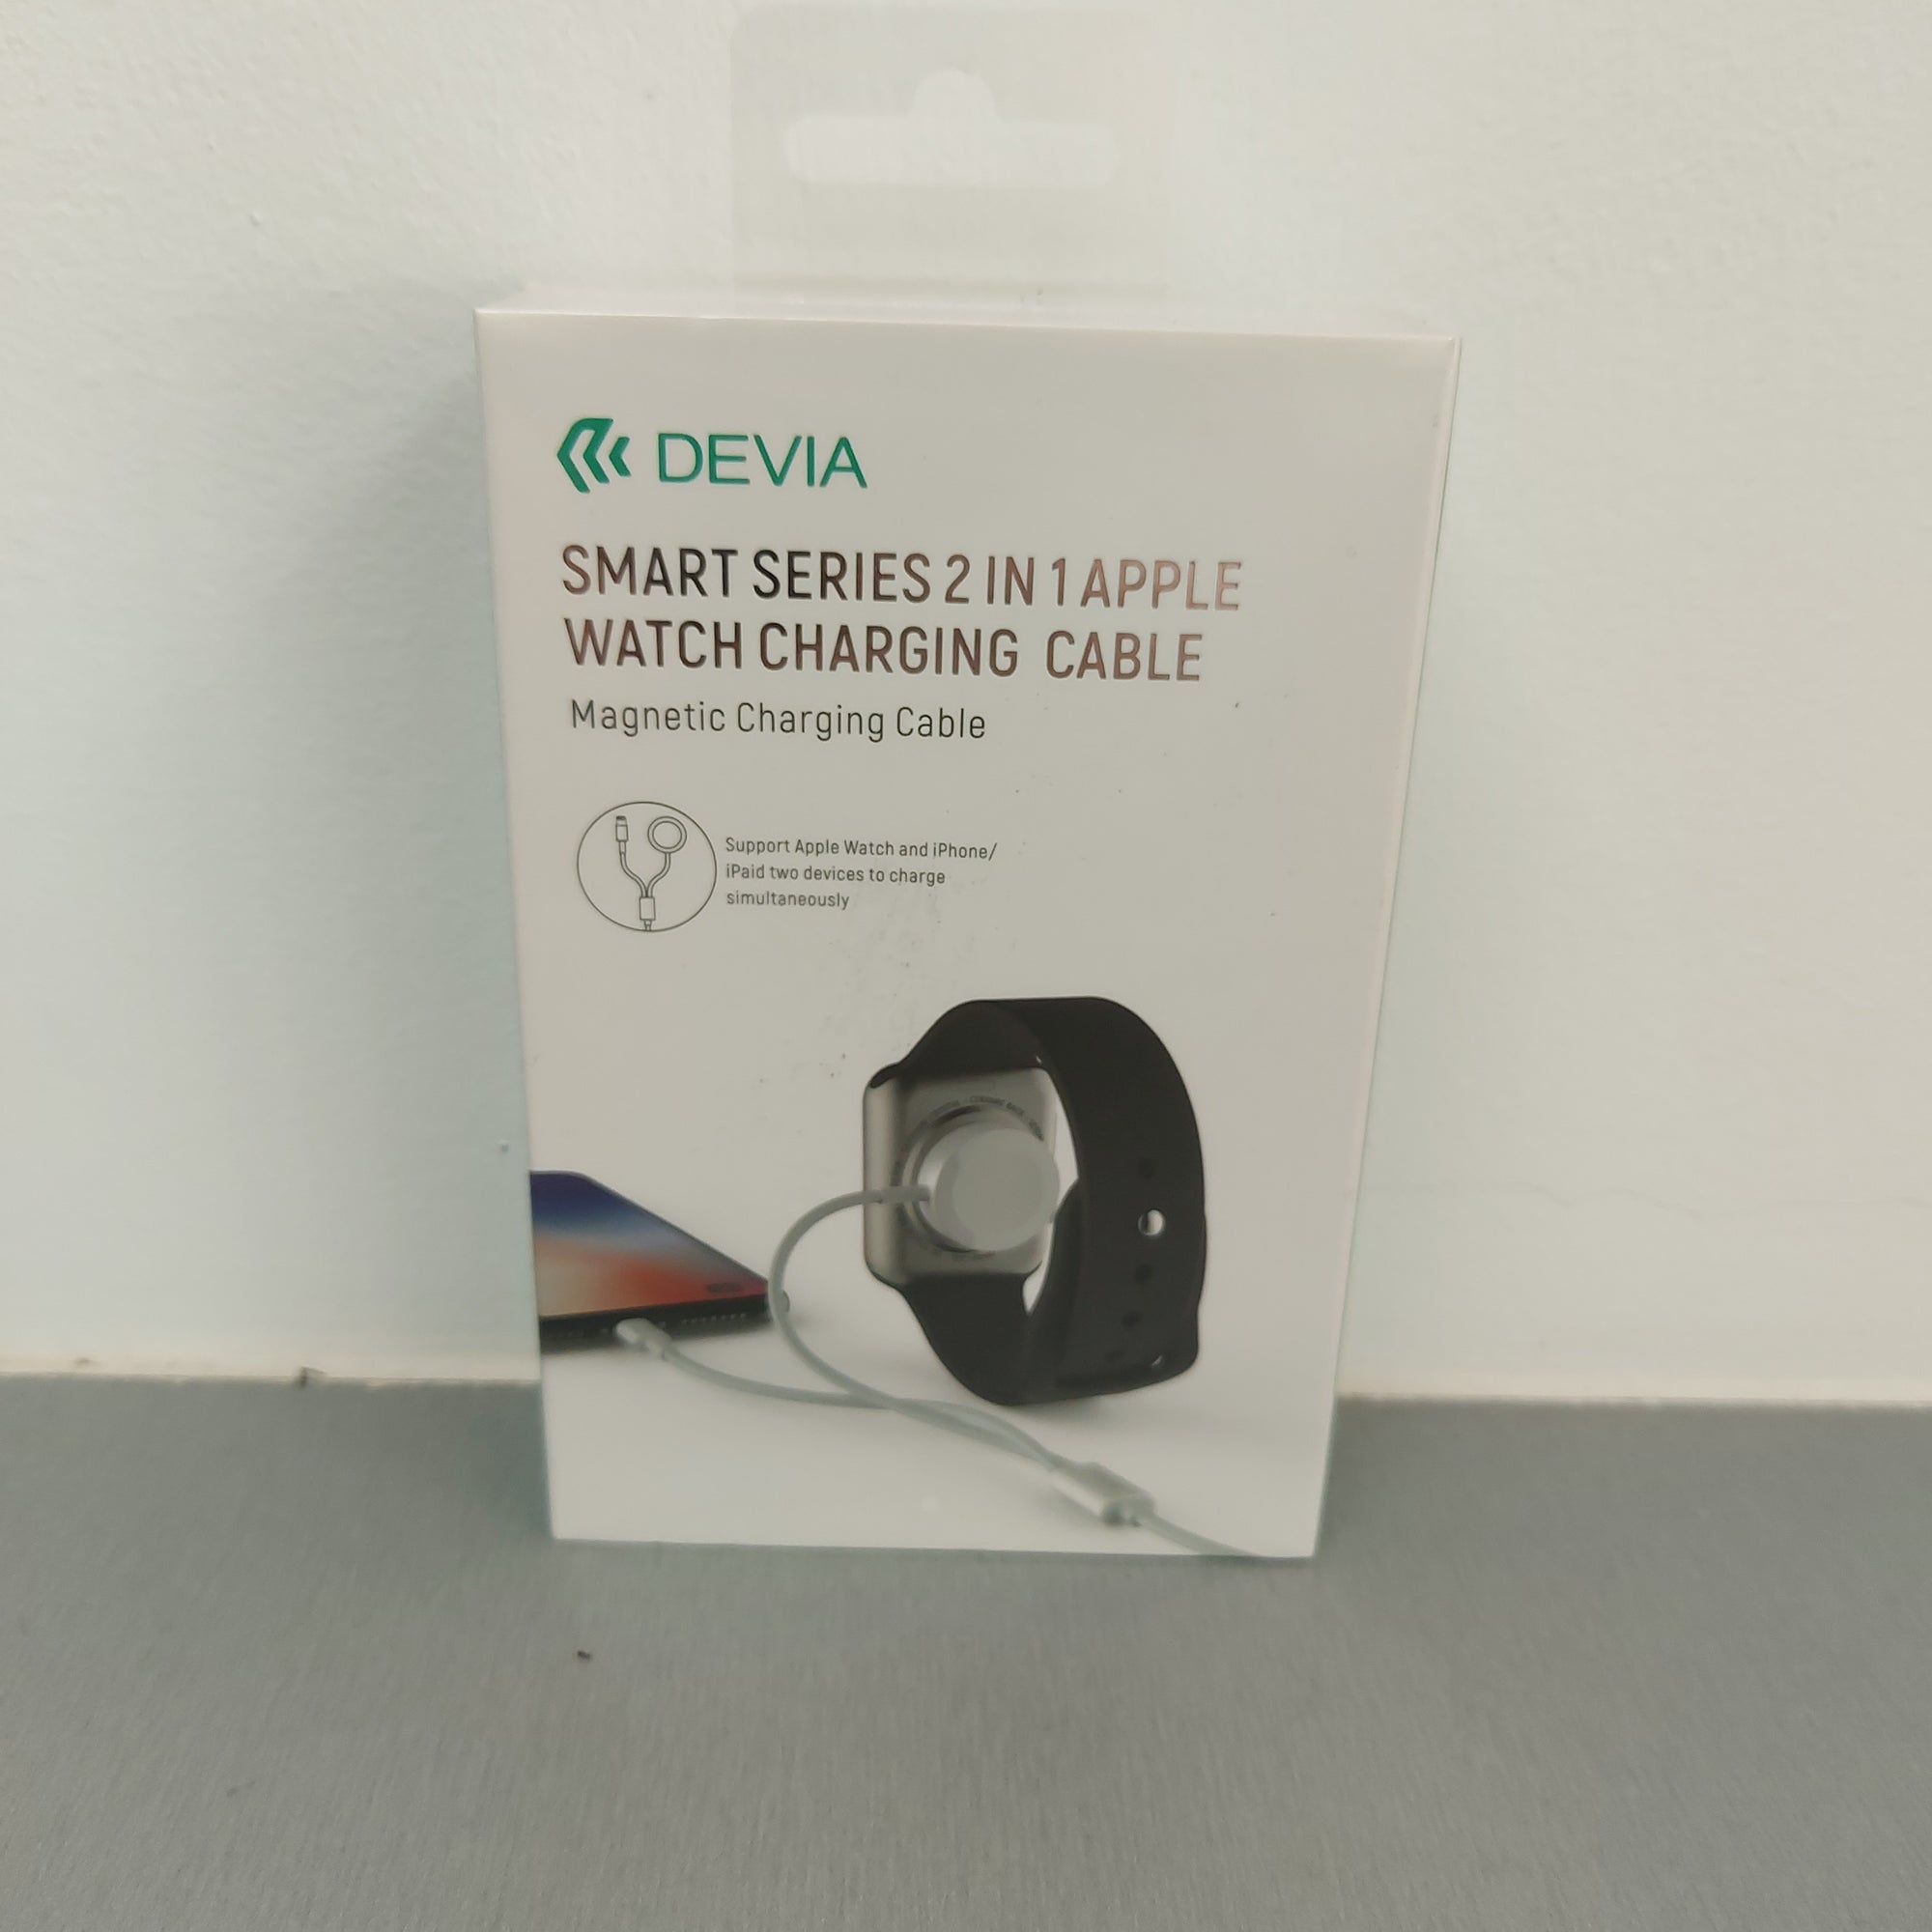 Devia Smart Series 2 in 1 Apple Watch Charging Cable